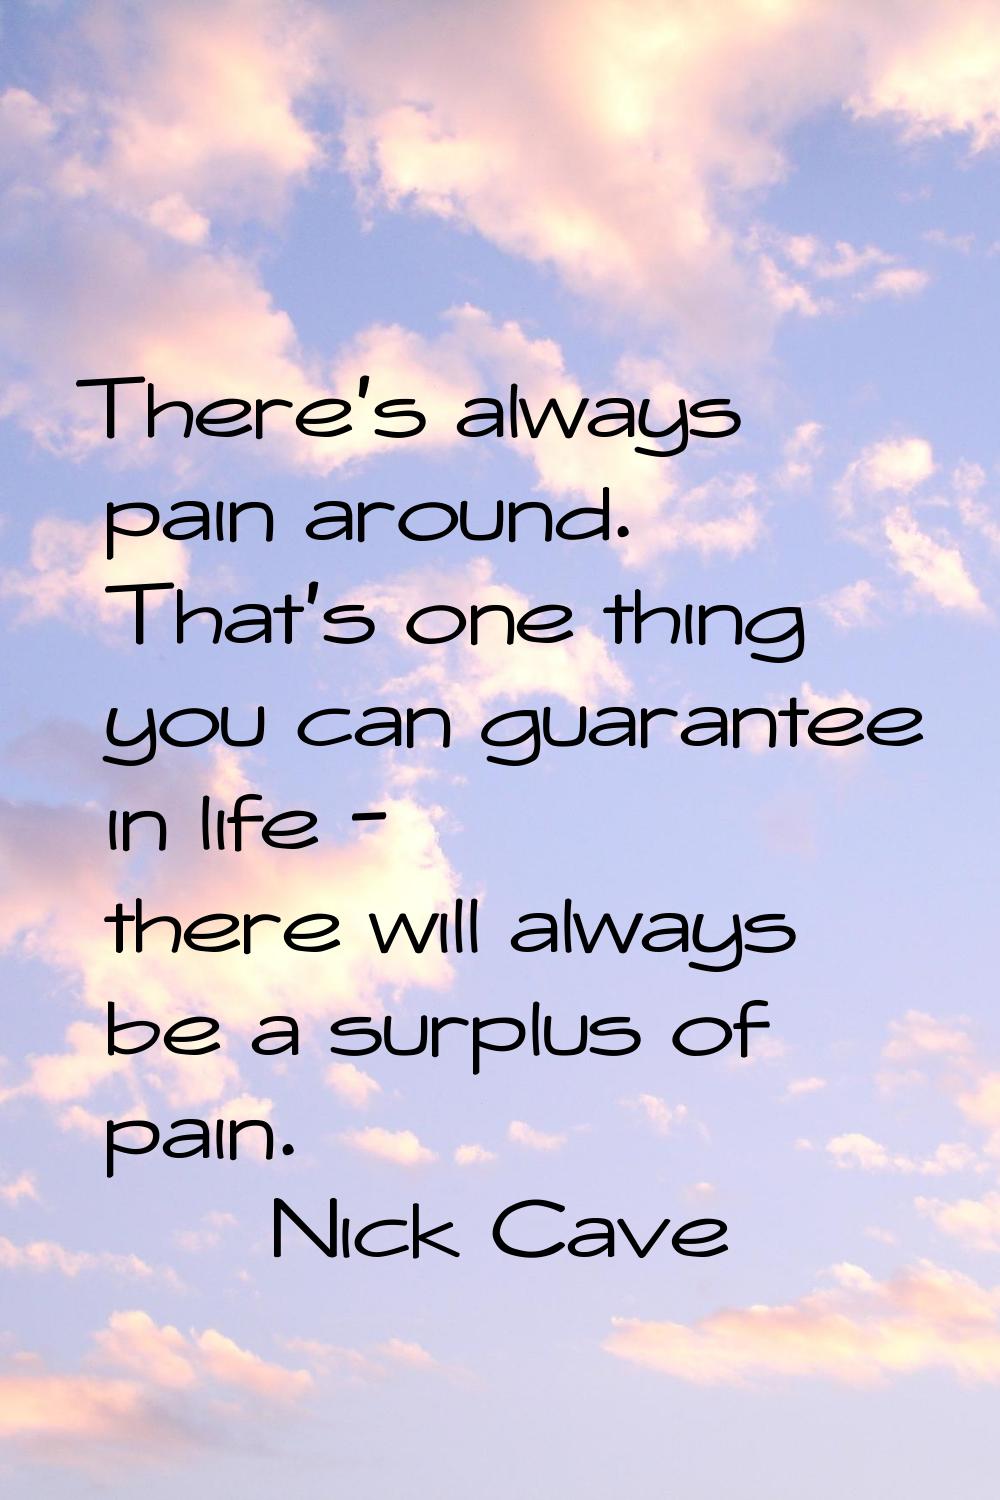 There's always pain around. That's one thing you can guarantee in life - there will always be a sur